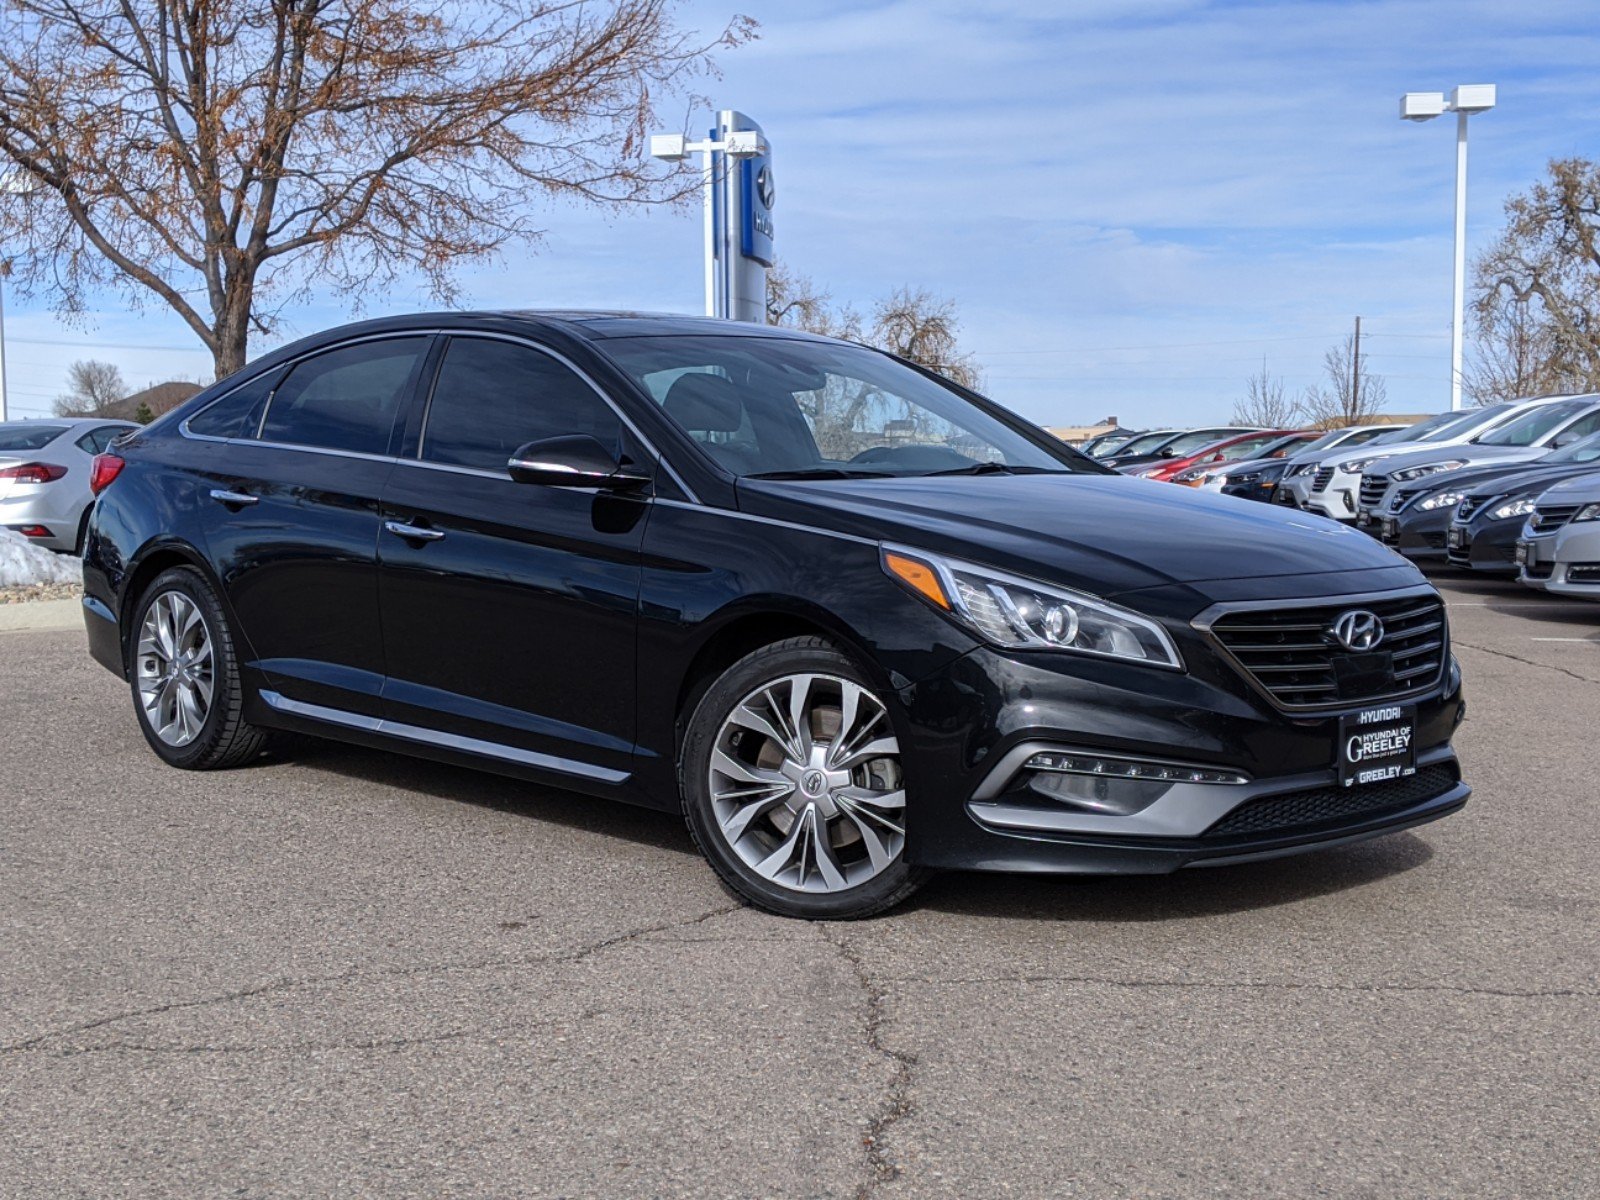 Pre-Owned 2015 Hyundai Sonata 2.0T Limited 4dr Car in ...